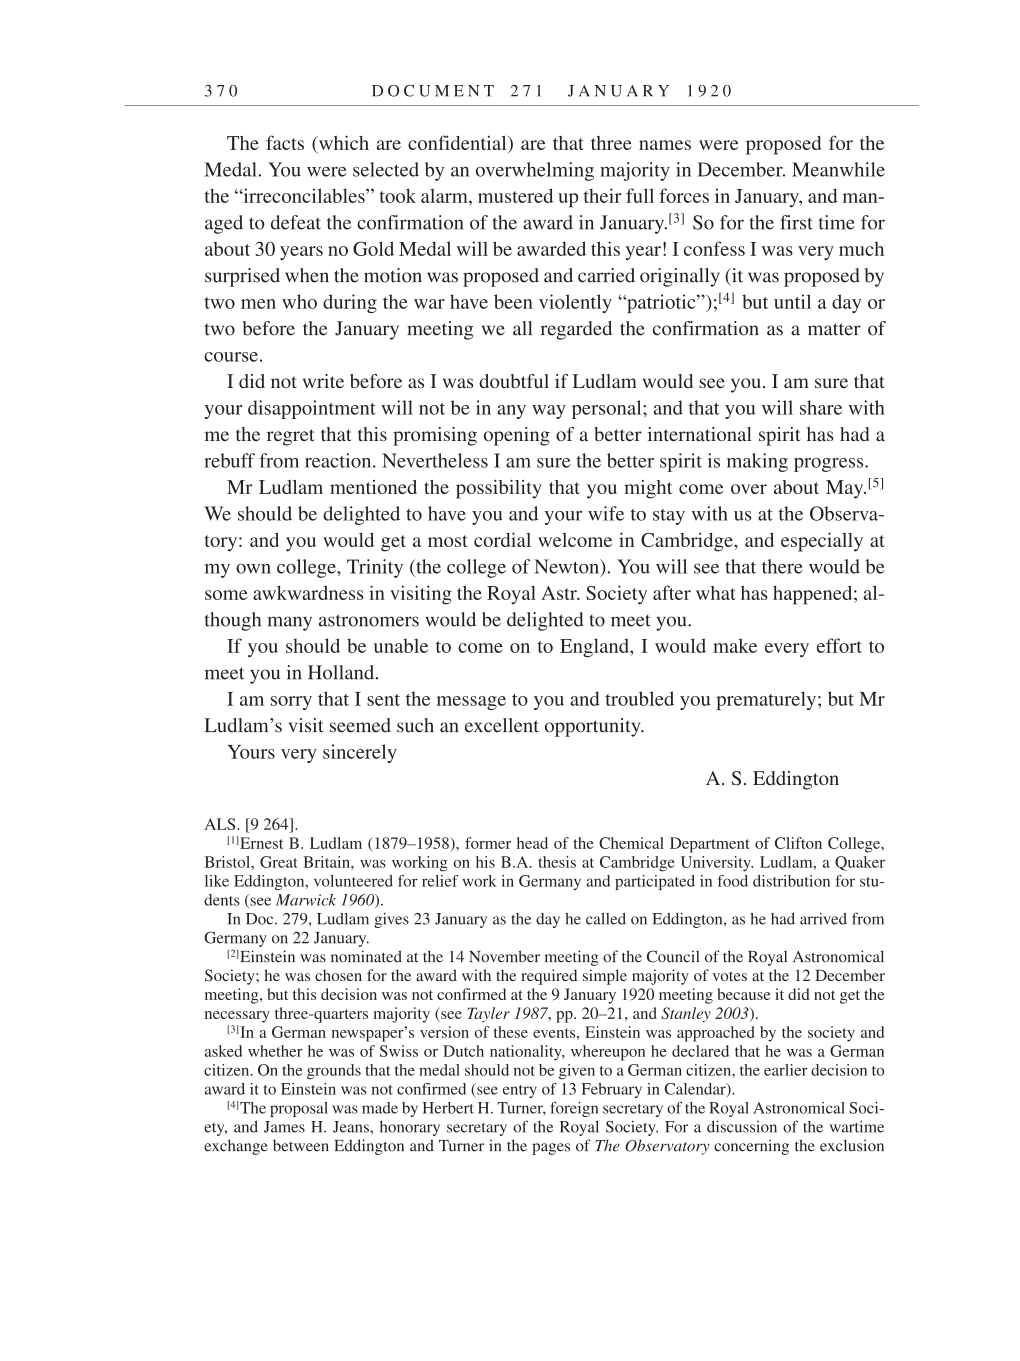 Volume 9: The Berlin Years: Correspondence January 1919-April 1920 page 370